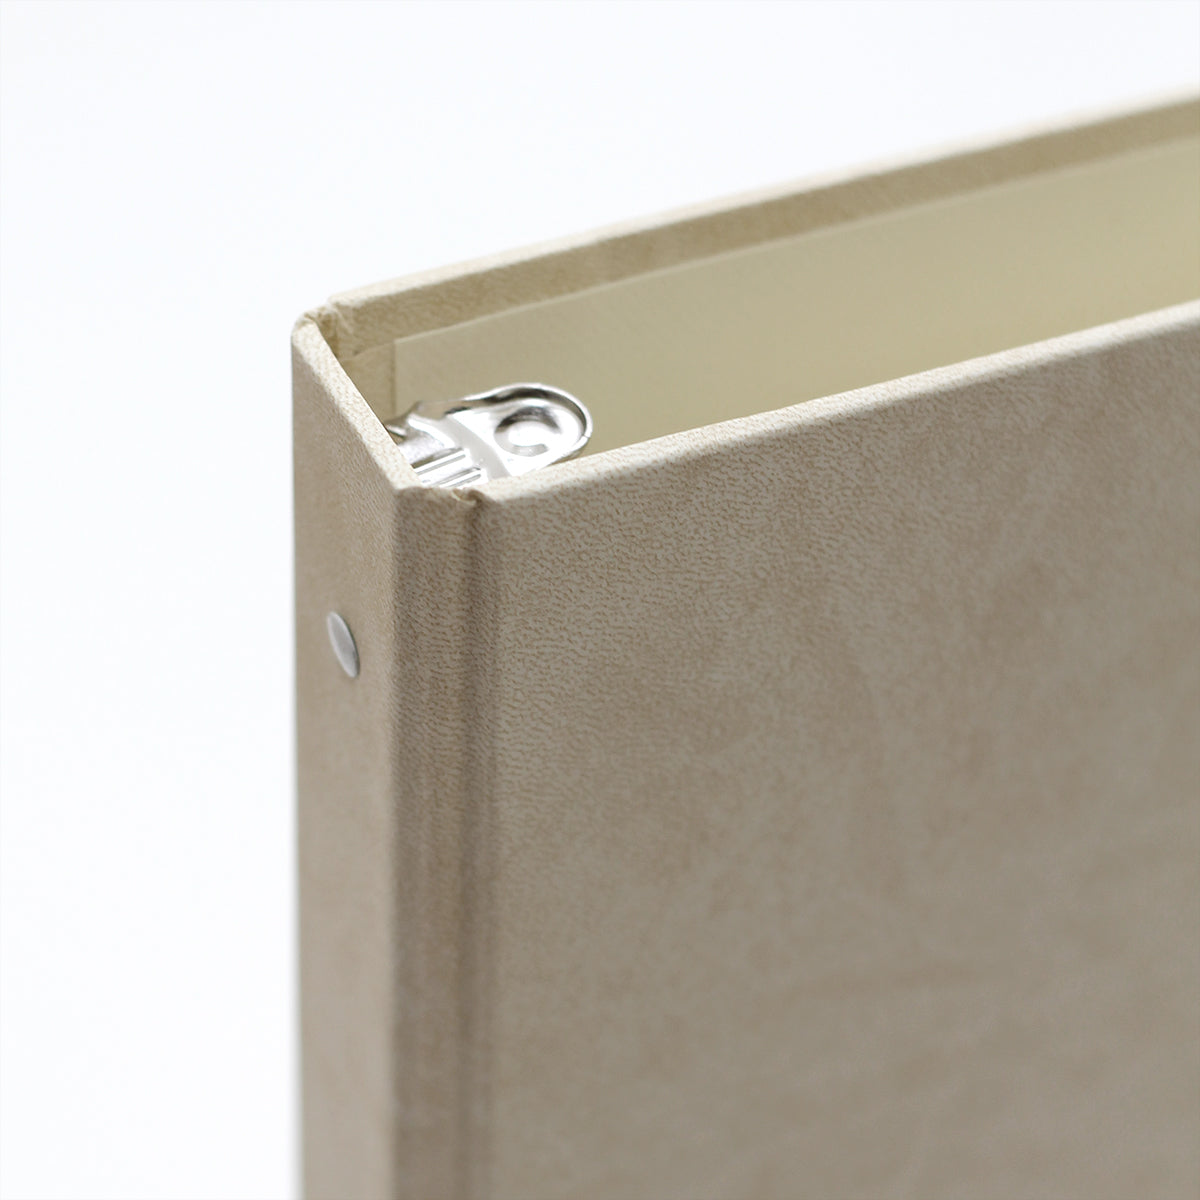 Photo Binder (for 5x7 photos) with Cream Animal Friendly Faux Leather